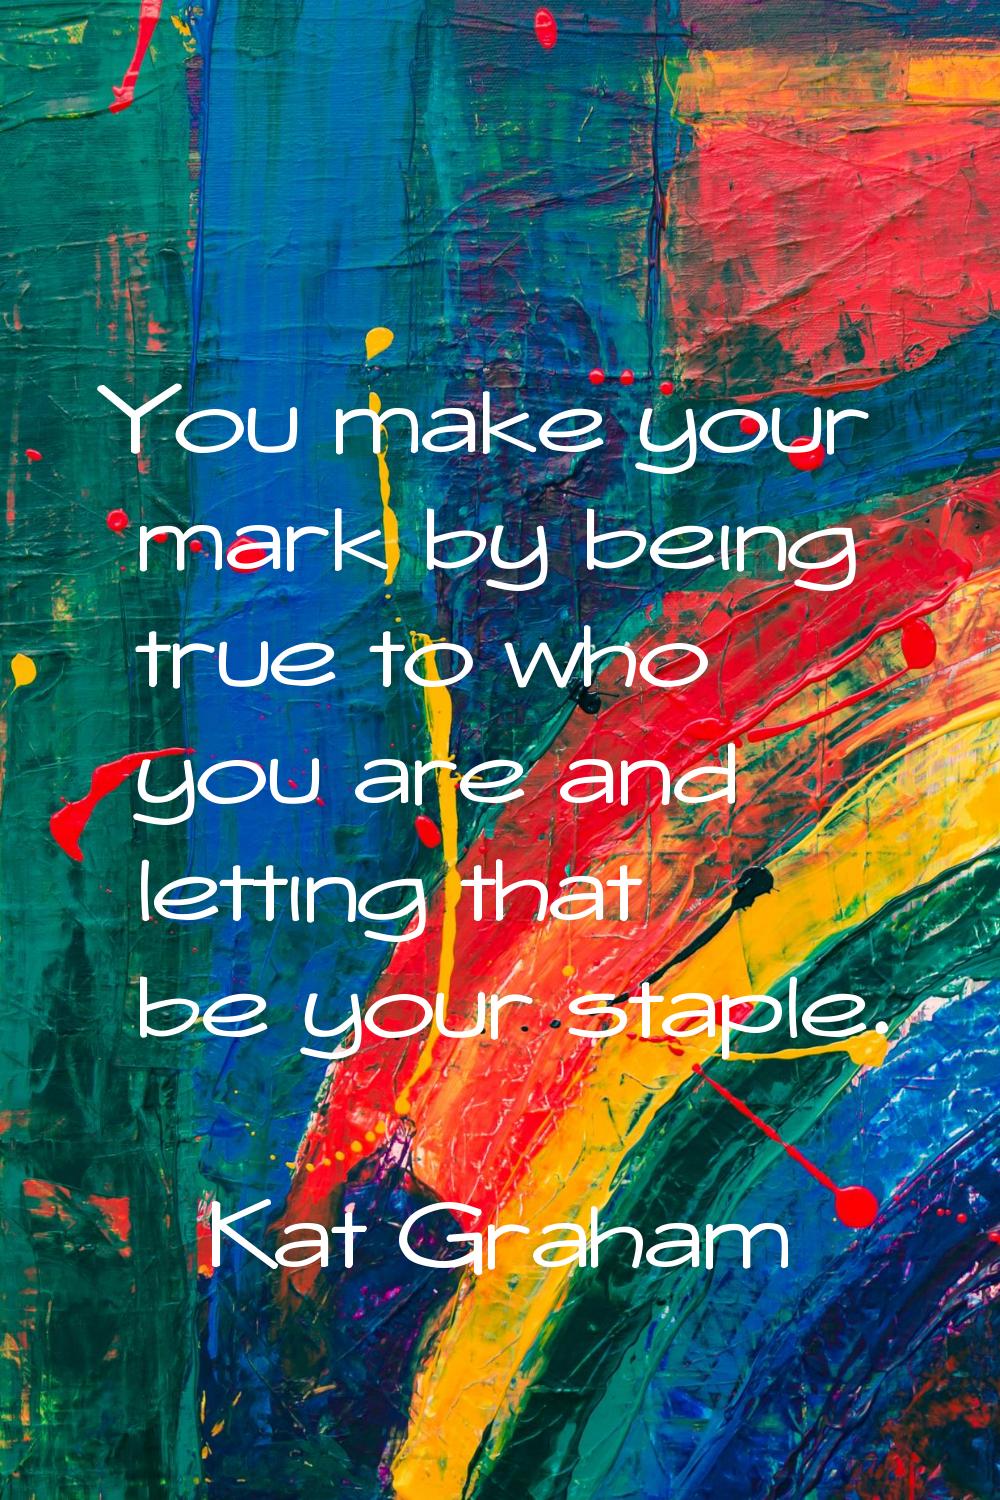 You make your mark by being true to who you are and letting that be your staple.